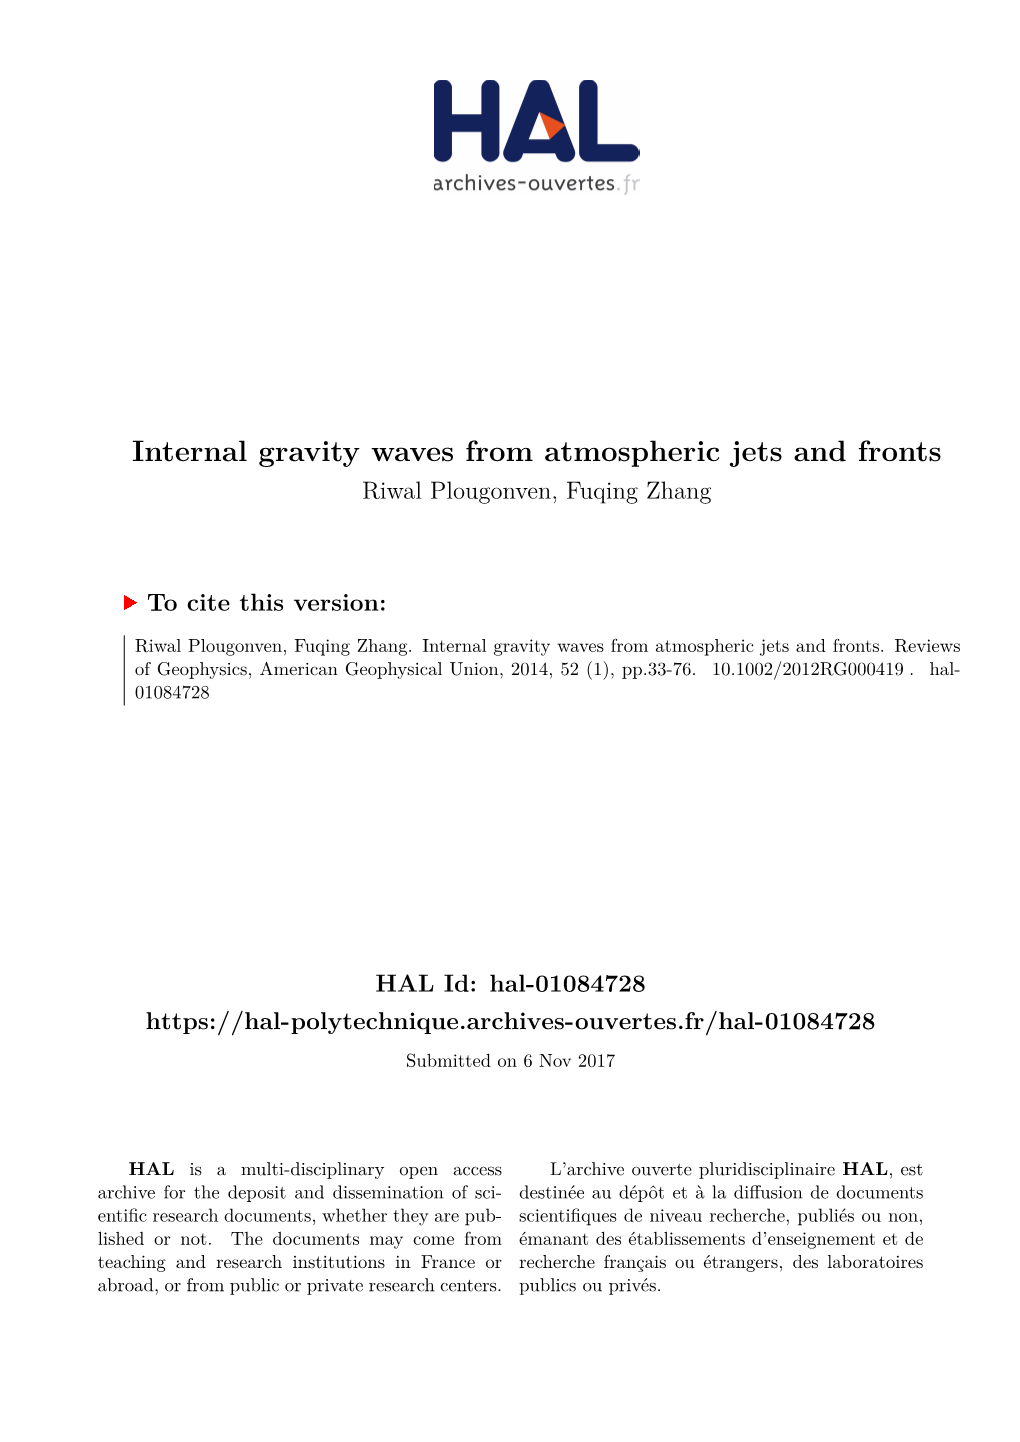 Internal Gravity Waves from Atmospheric Jets and Fronts Riwal Plougonven, Fuqing Zhang